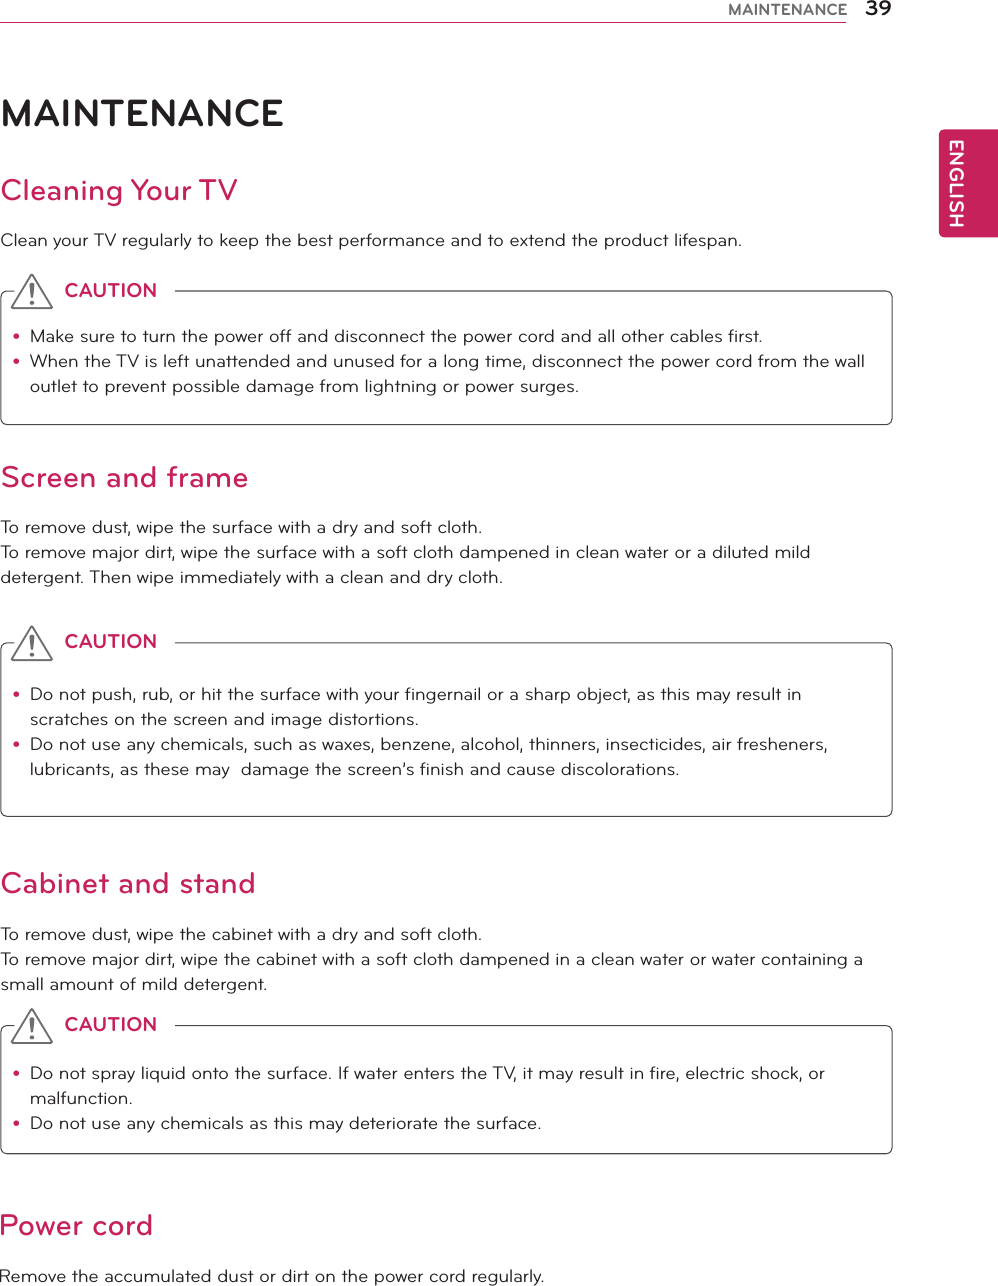 ENGLISH39MAINTENANCEMAINTENANCECleaning Your TVClean your TV regularly to keep the best performance and to extend the product lifespan.Screen and frameTo remove dust, wipe the surface with a dry and soft cloth.To remove major dirt, wipe the surface with a soft cloth dampened in clean water or a diluted mild detergent. Then wipe immediately with a clean and dry cloth.Cabinet and standTo remove dust, wipe the cabinet with a dry and soft cloth.To remove major dirt, wipe the cabinet with a soft cloth dampened in a clean water or water containing a small amount of mild detergent.Power cordRemove the accumulated dust or dirt on the power cord regularly. y Make sure to turn the power off and disconnect the power cord and all other cables first.y When the TV is left unattended and unused for a long time, disconnect the power cord from the wall outlet to prevent possible damage from lightning or power surges.y Do not push, rub, or hit the surface with your fingernail or a sharp object, as this may result in scratches on the screen and image distortions.y Do not use any chemicals, such as waxes, benzene, alcohol, thinners, insecticides, air fresheners, lubricants, as these may  damage the screen’s finish and cause discolorations.y Do not spray liquid onto the surface. If water enters the TV, it may result in fire, electric shock, or malfunction.y Do not use any chemicals as this may deteriorate the surface.CAUTIONCAUTIONCAUTION